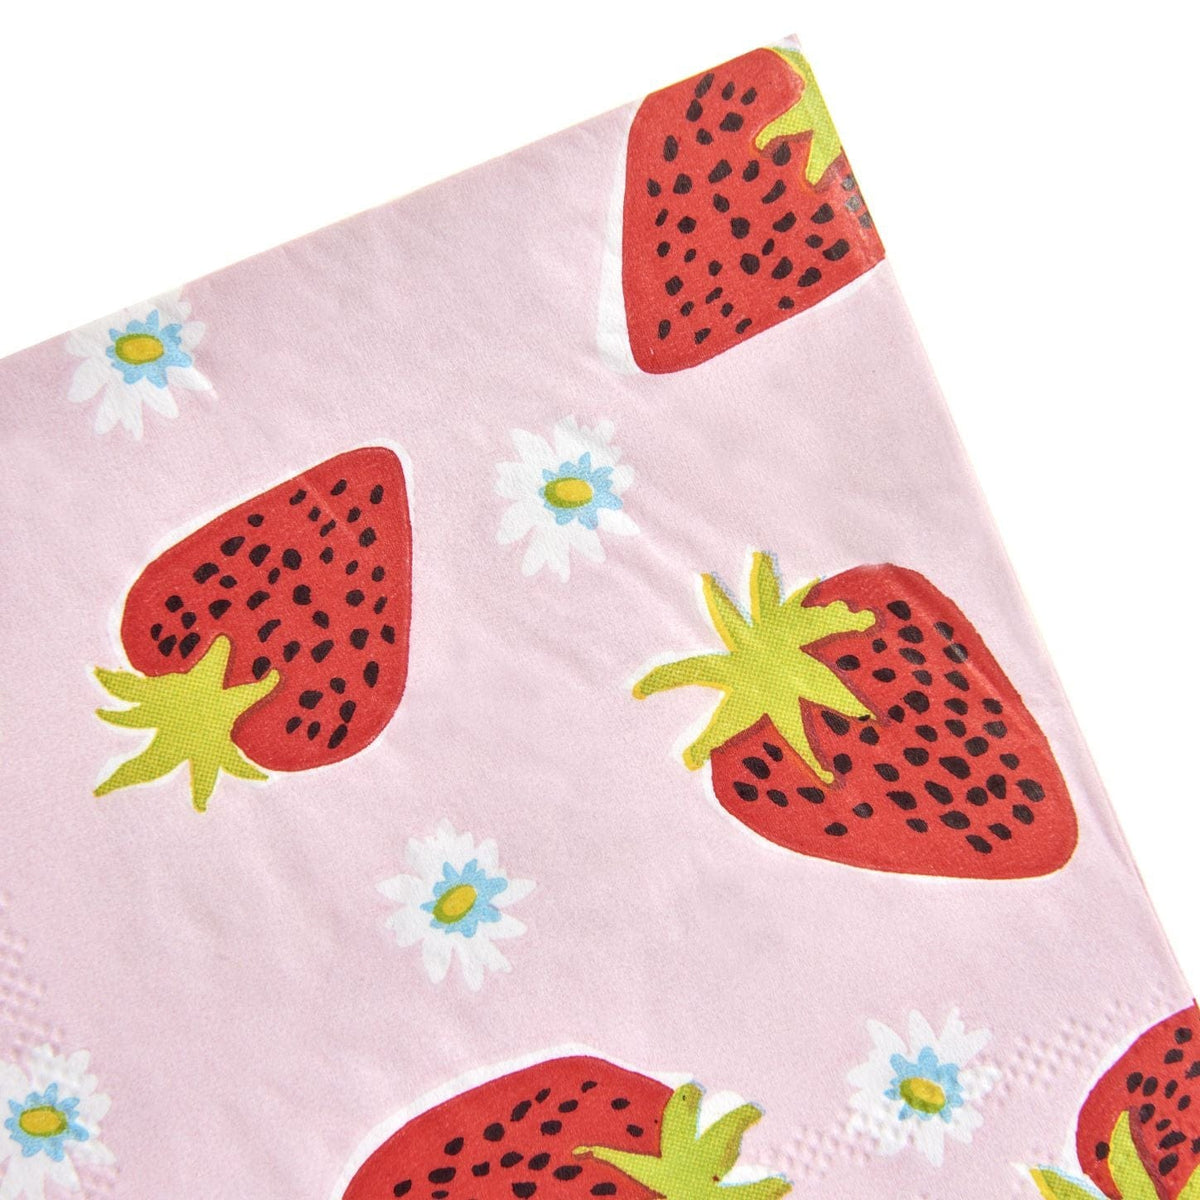 Strawberry Cocktail Napkins - 40 Count Roobee Napkins 89213